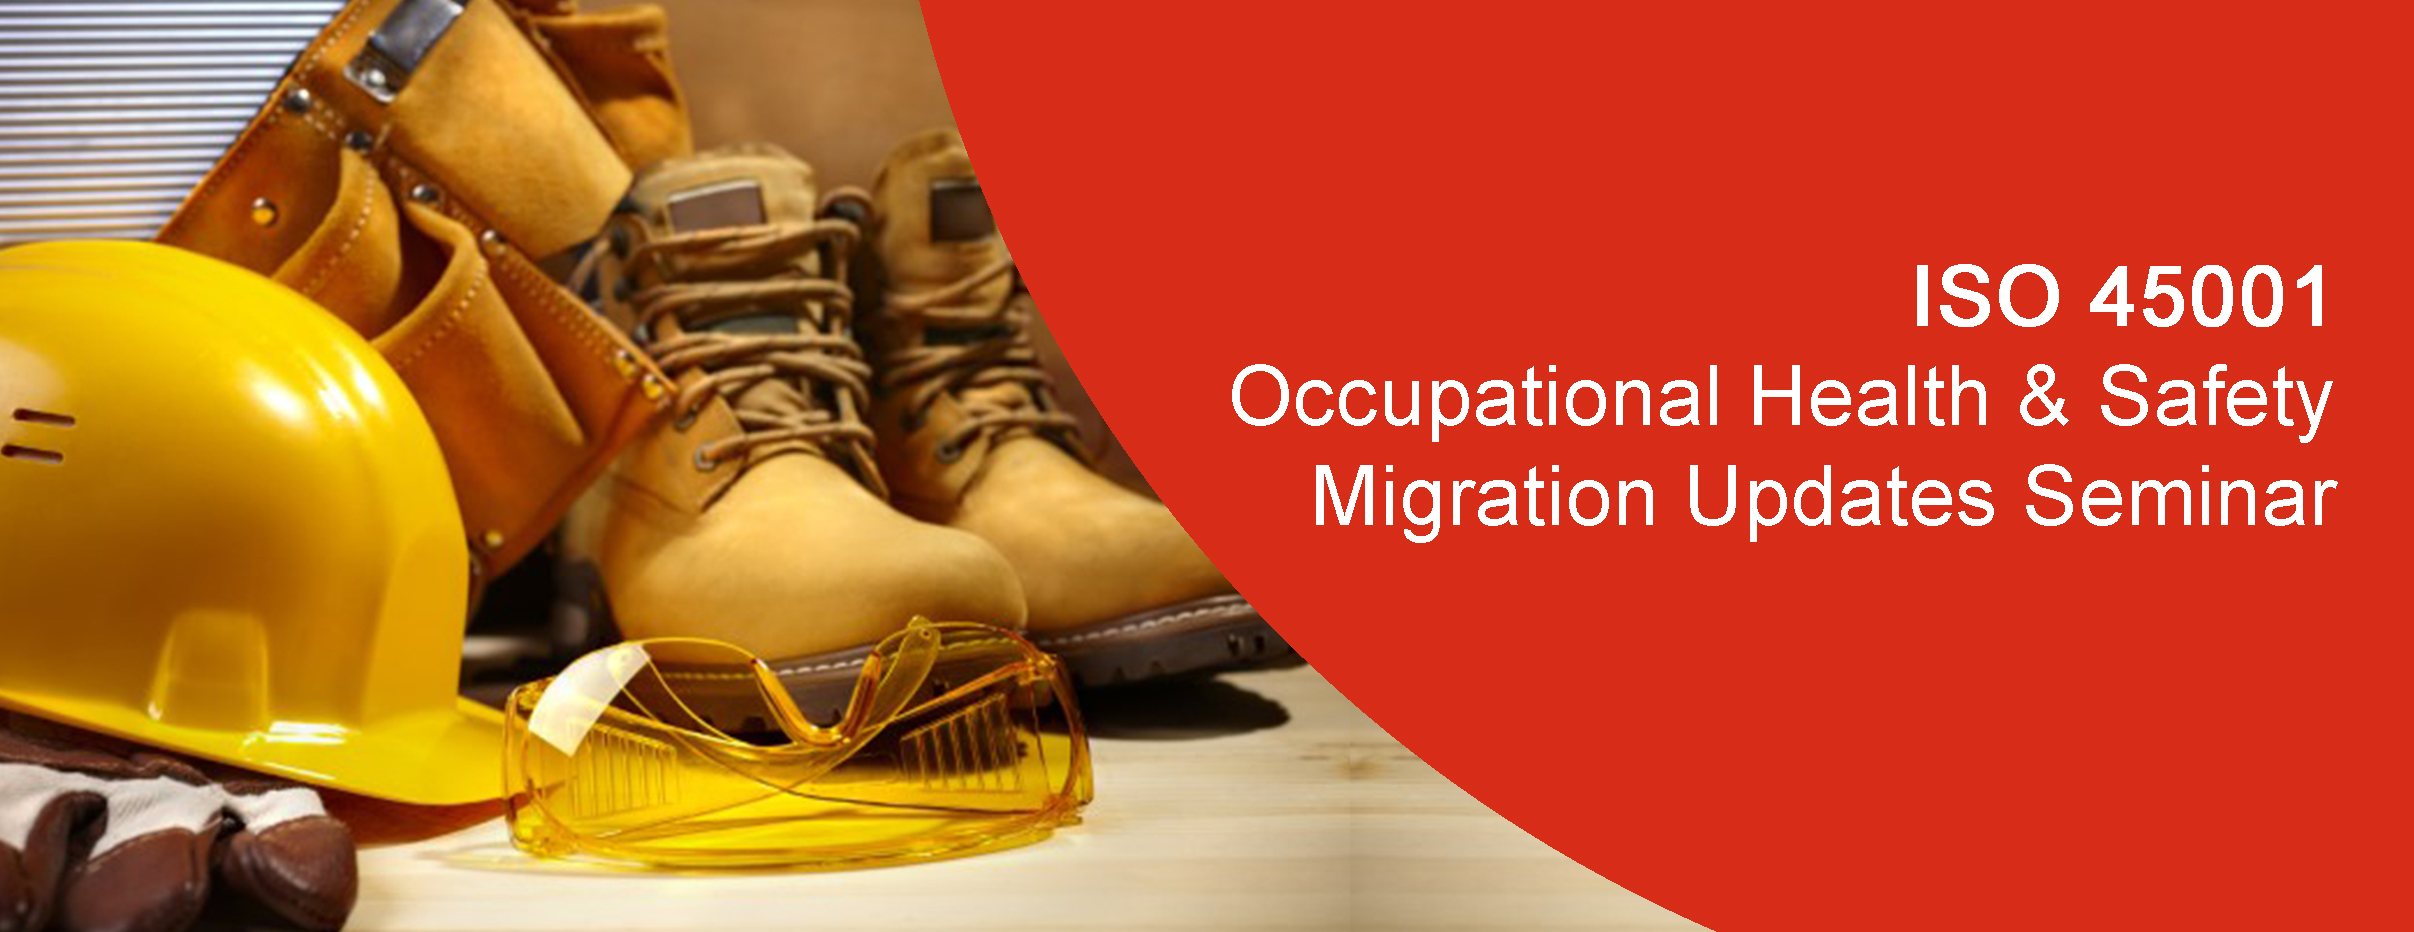 ISO 45001 Occupational Health & Safety Migration Updates Seminar